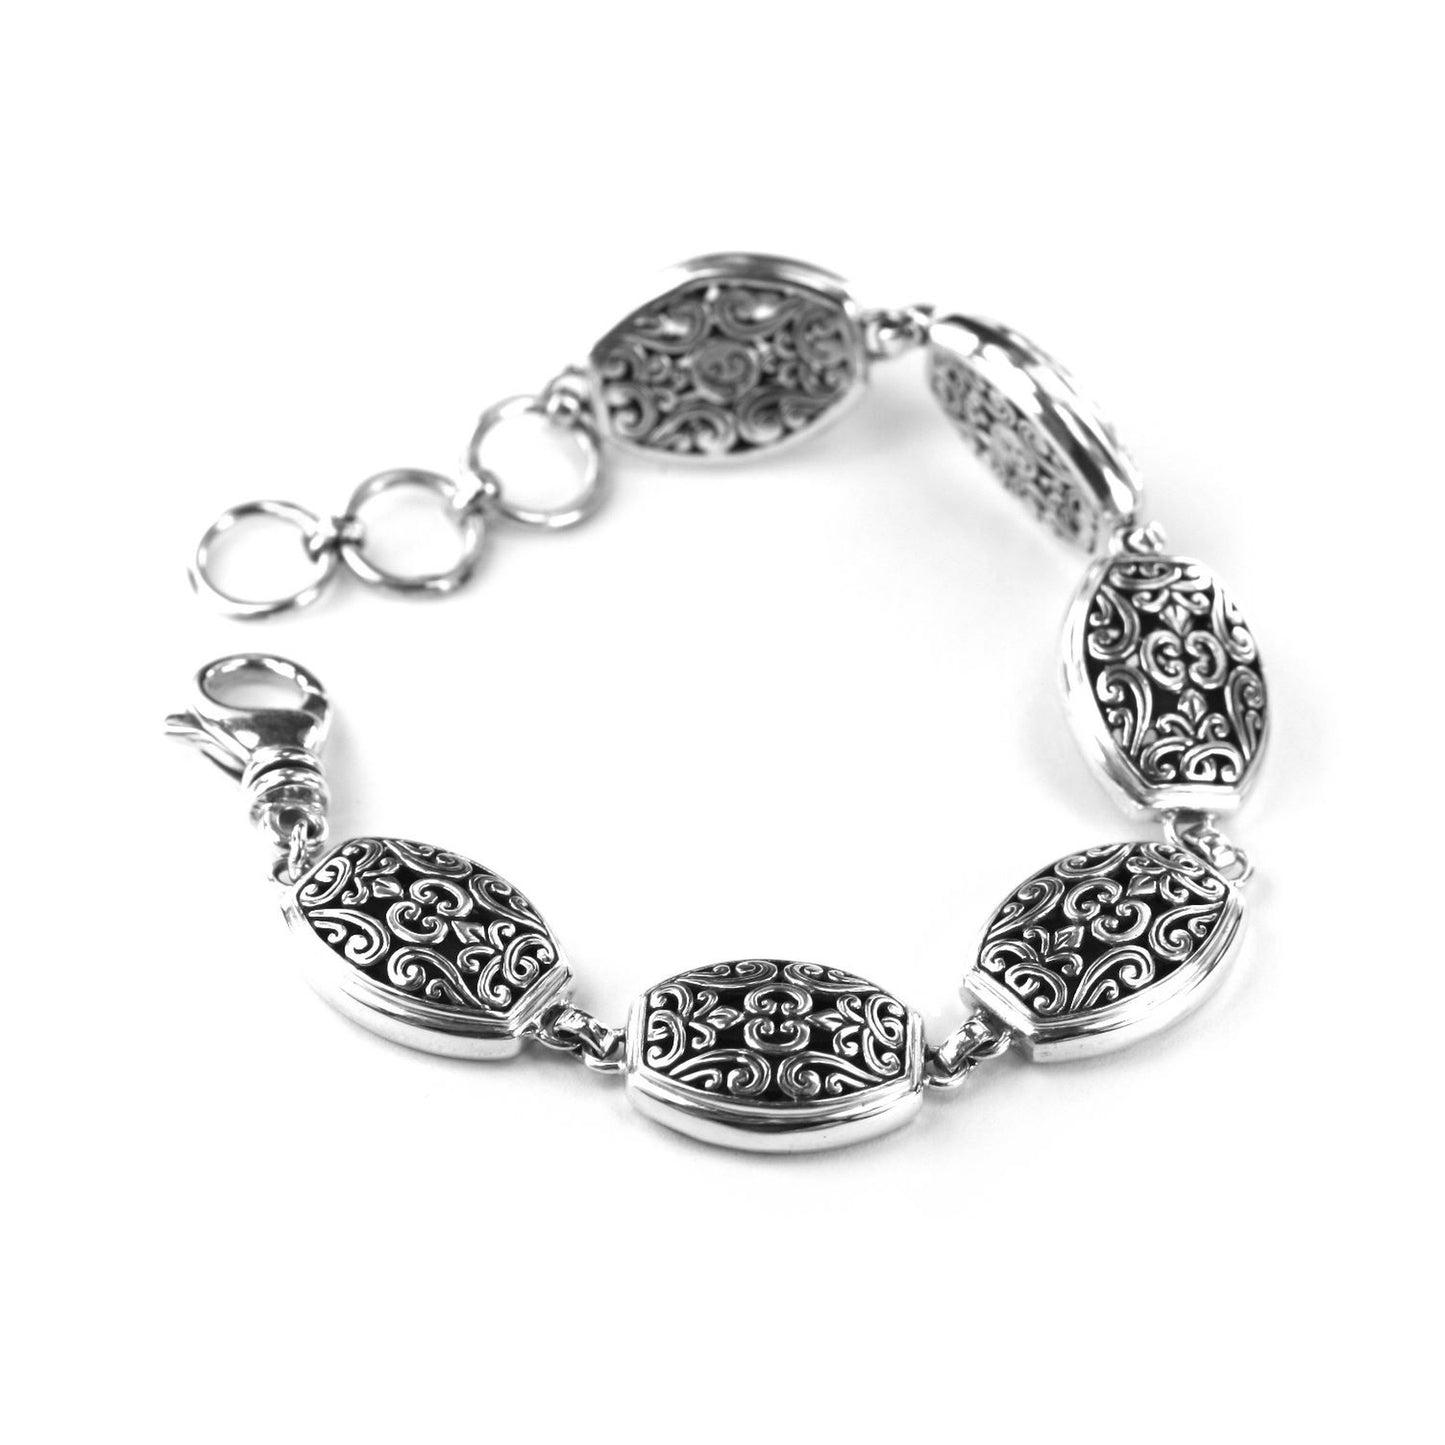 Silver bracelet with oval ornate links and a lobster clasp.